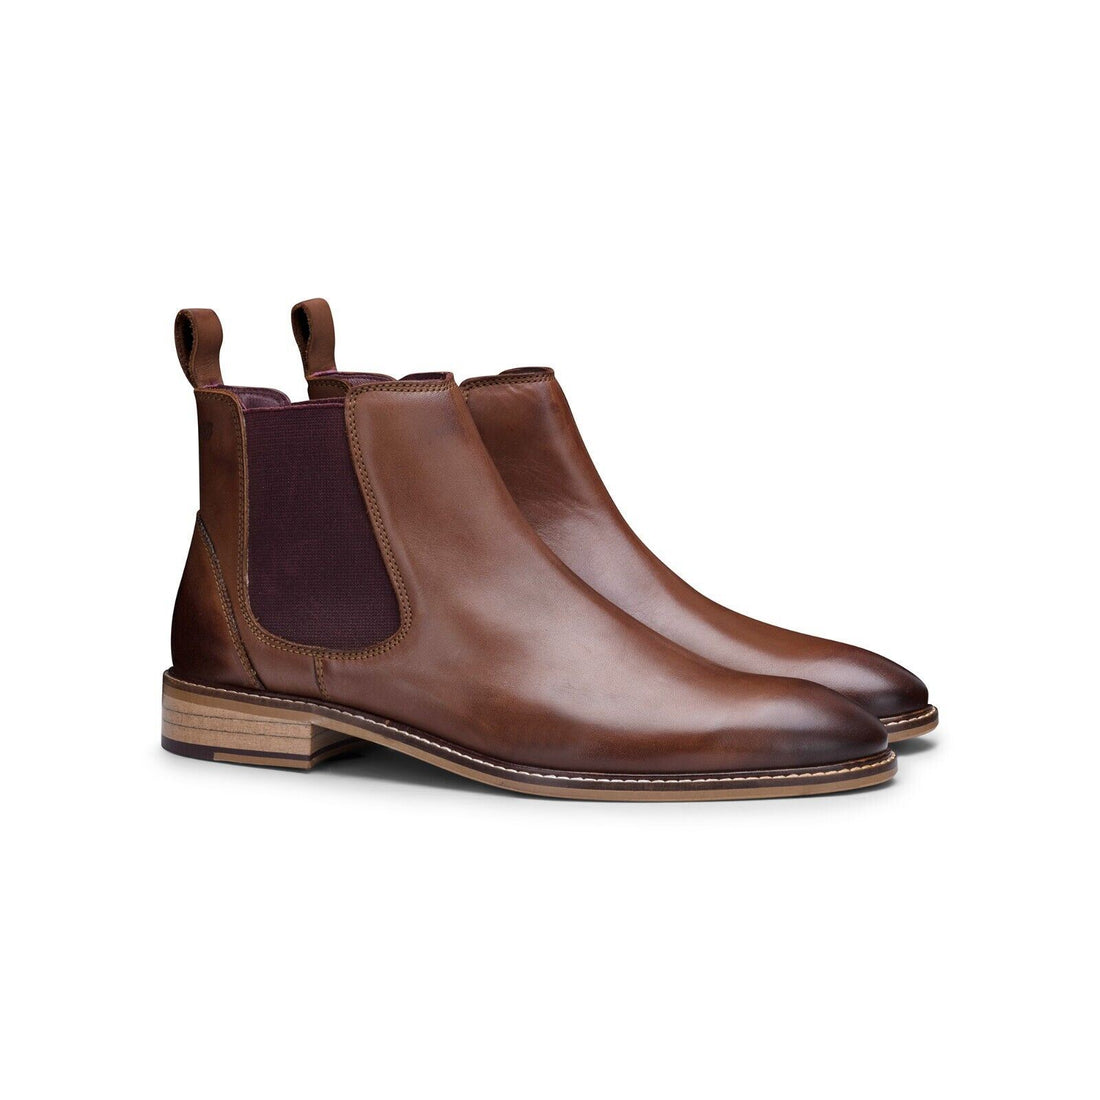 Mens Chestnut-Brown Leather Classic Chelsea Boots - Upperclass Fashions 